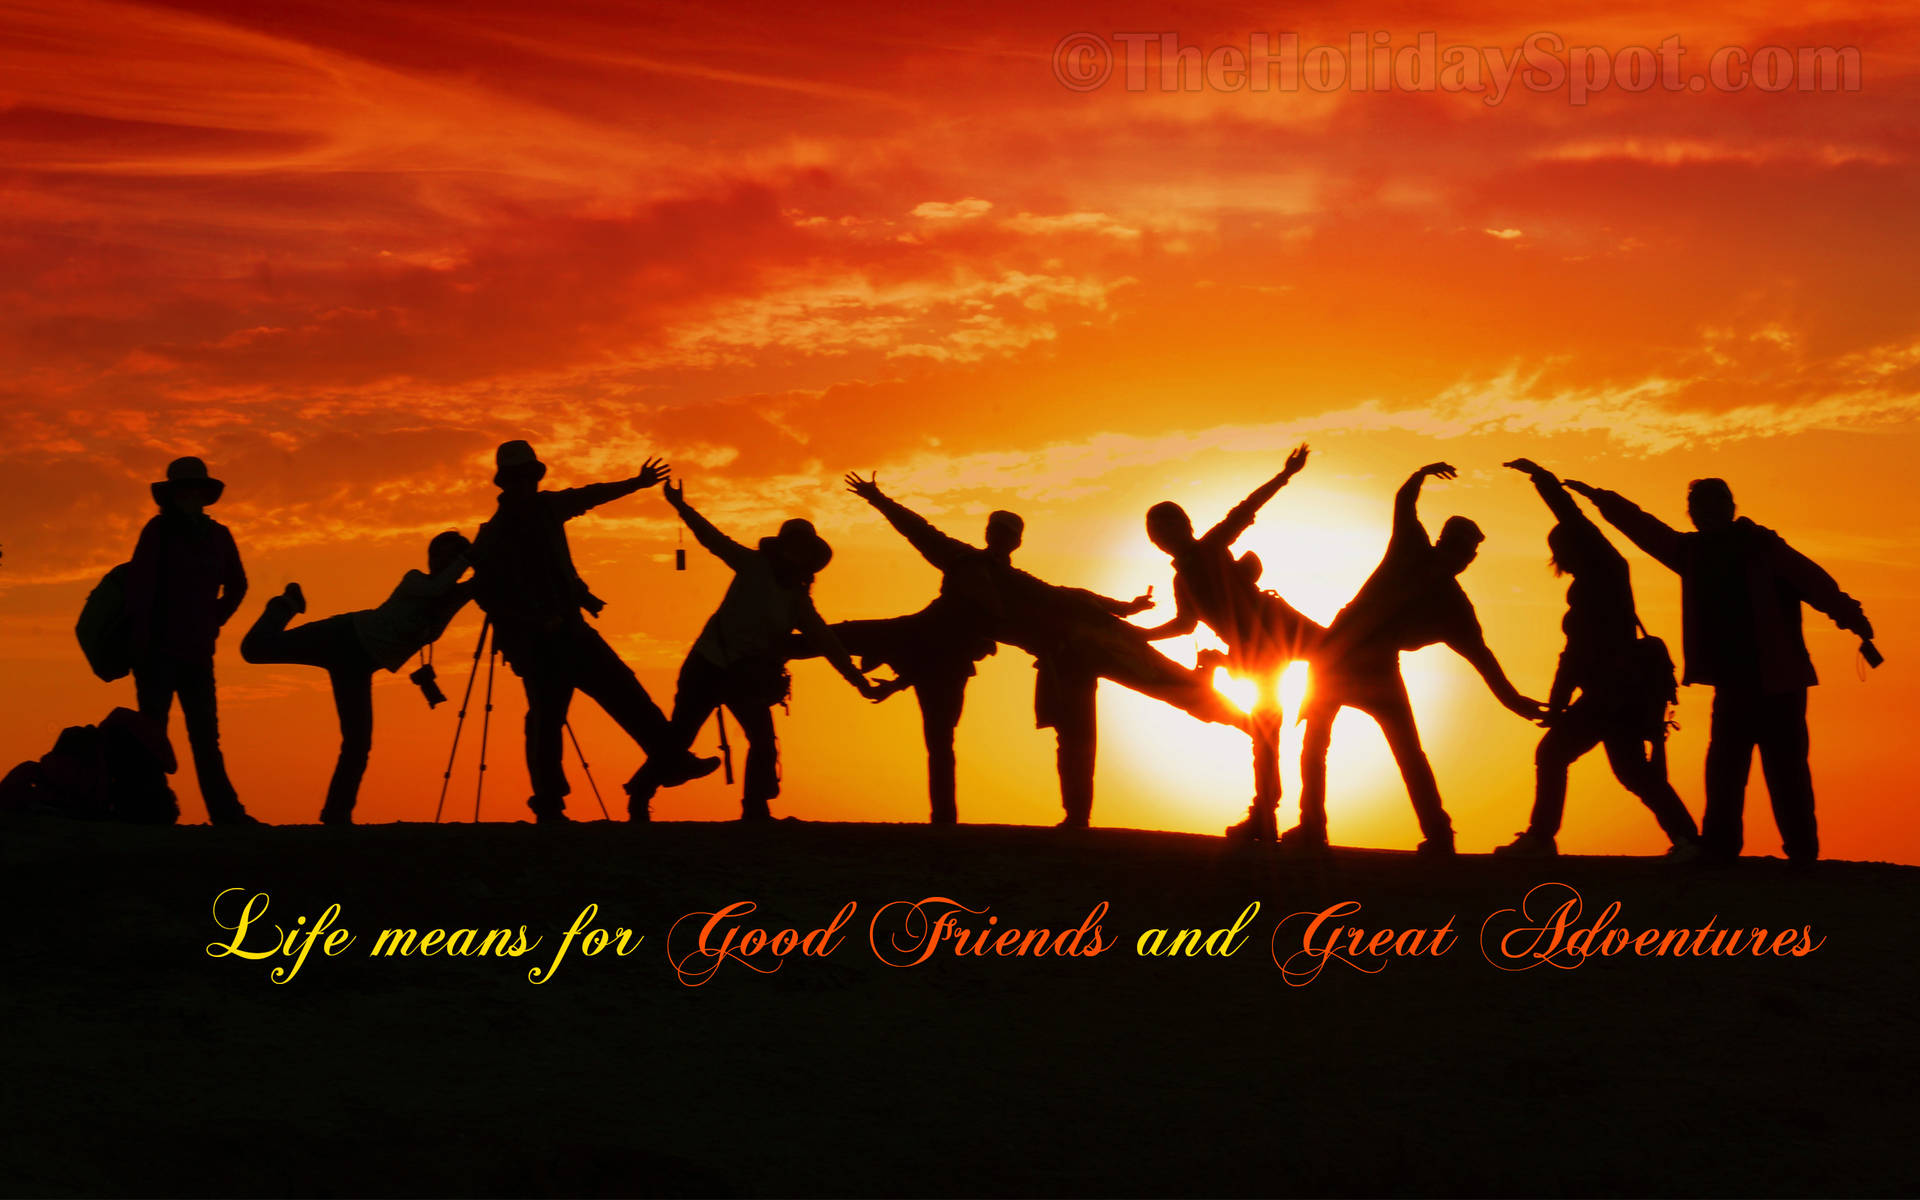 Good Friends And Great Adventures Wallpaper